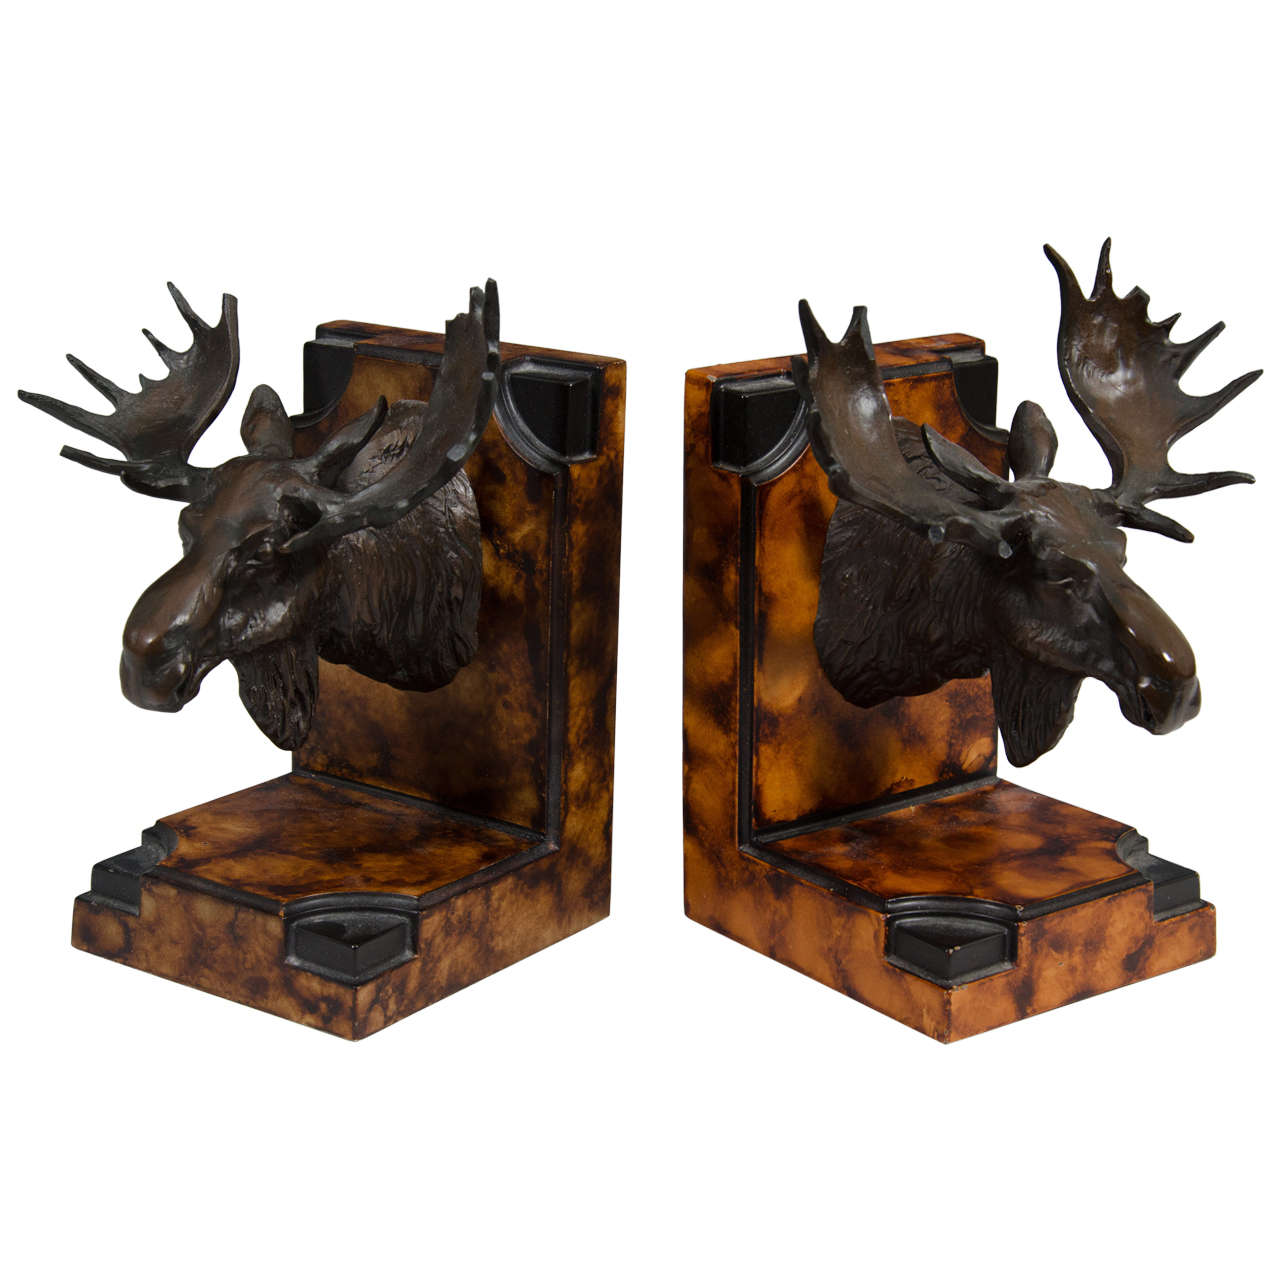 Moose Black Metal Bookends sold as a pair 